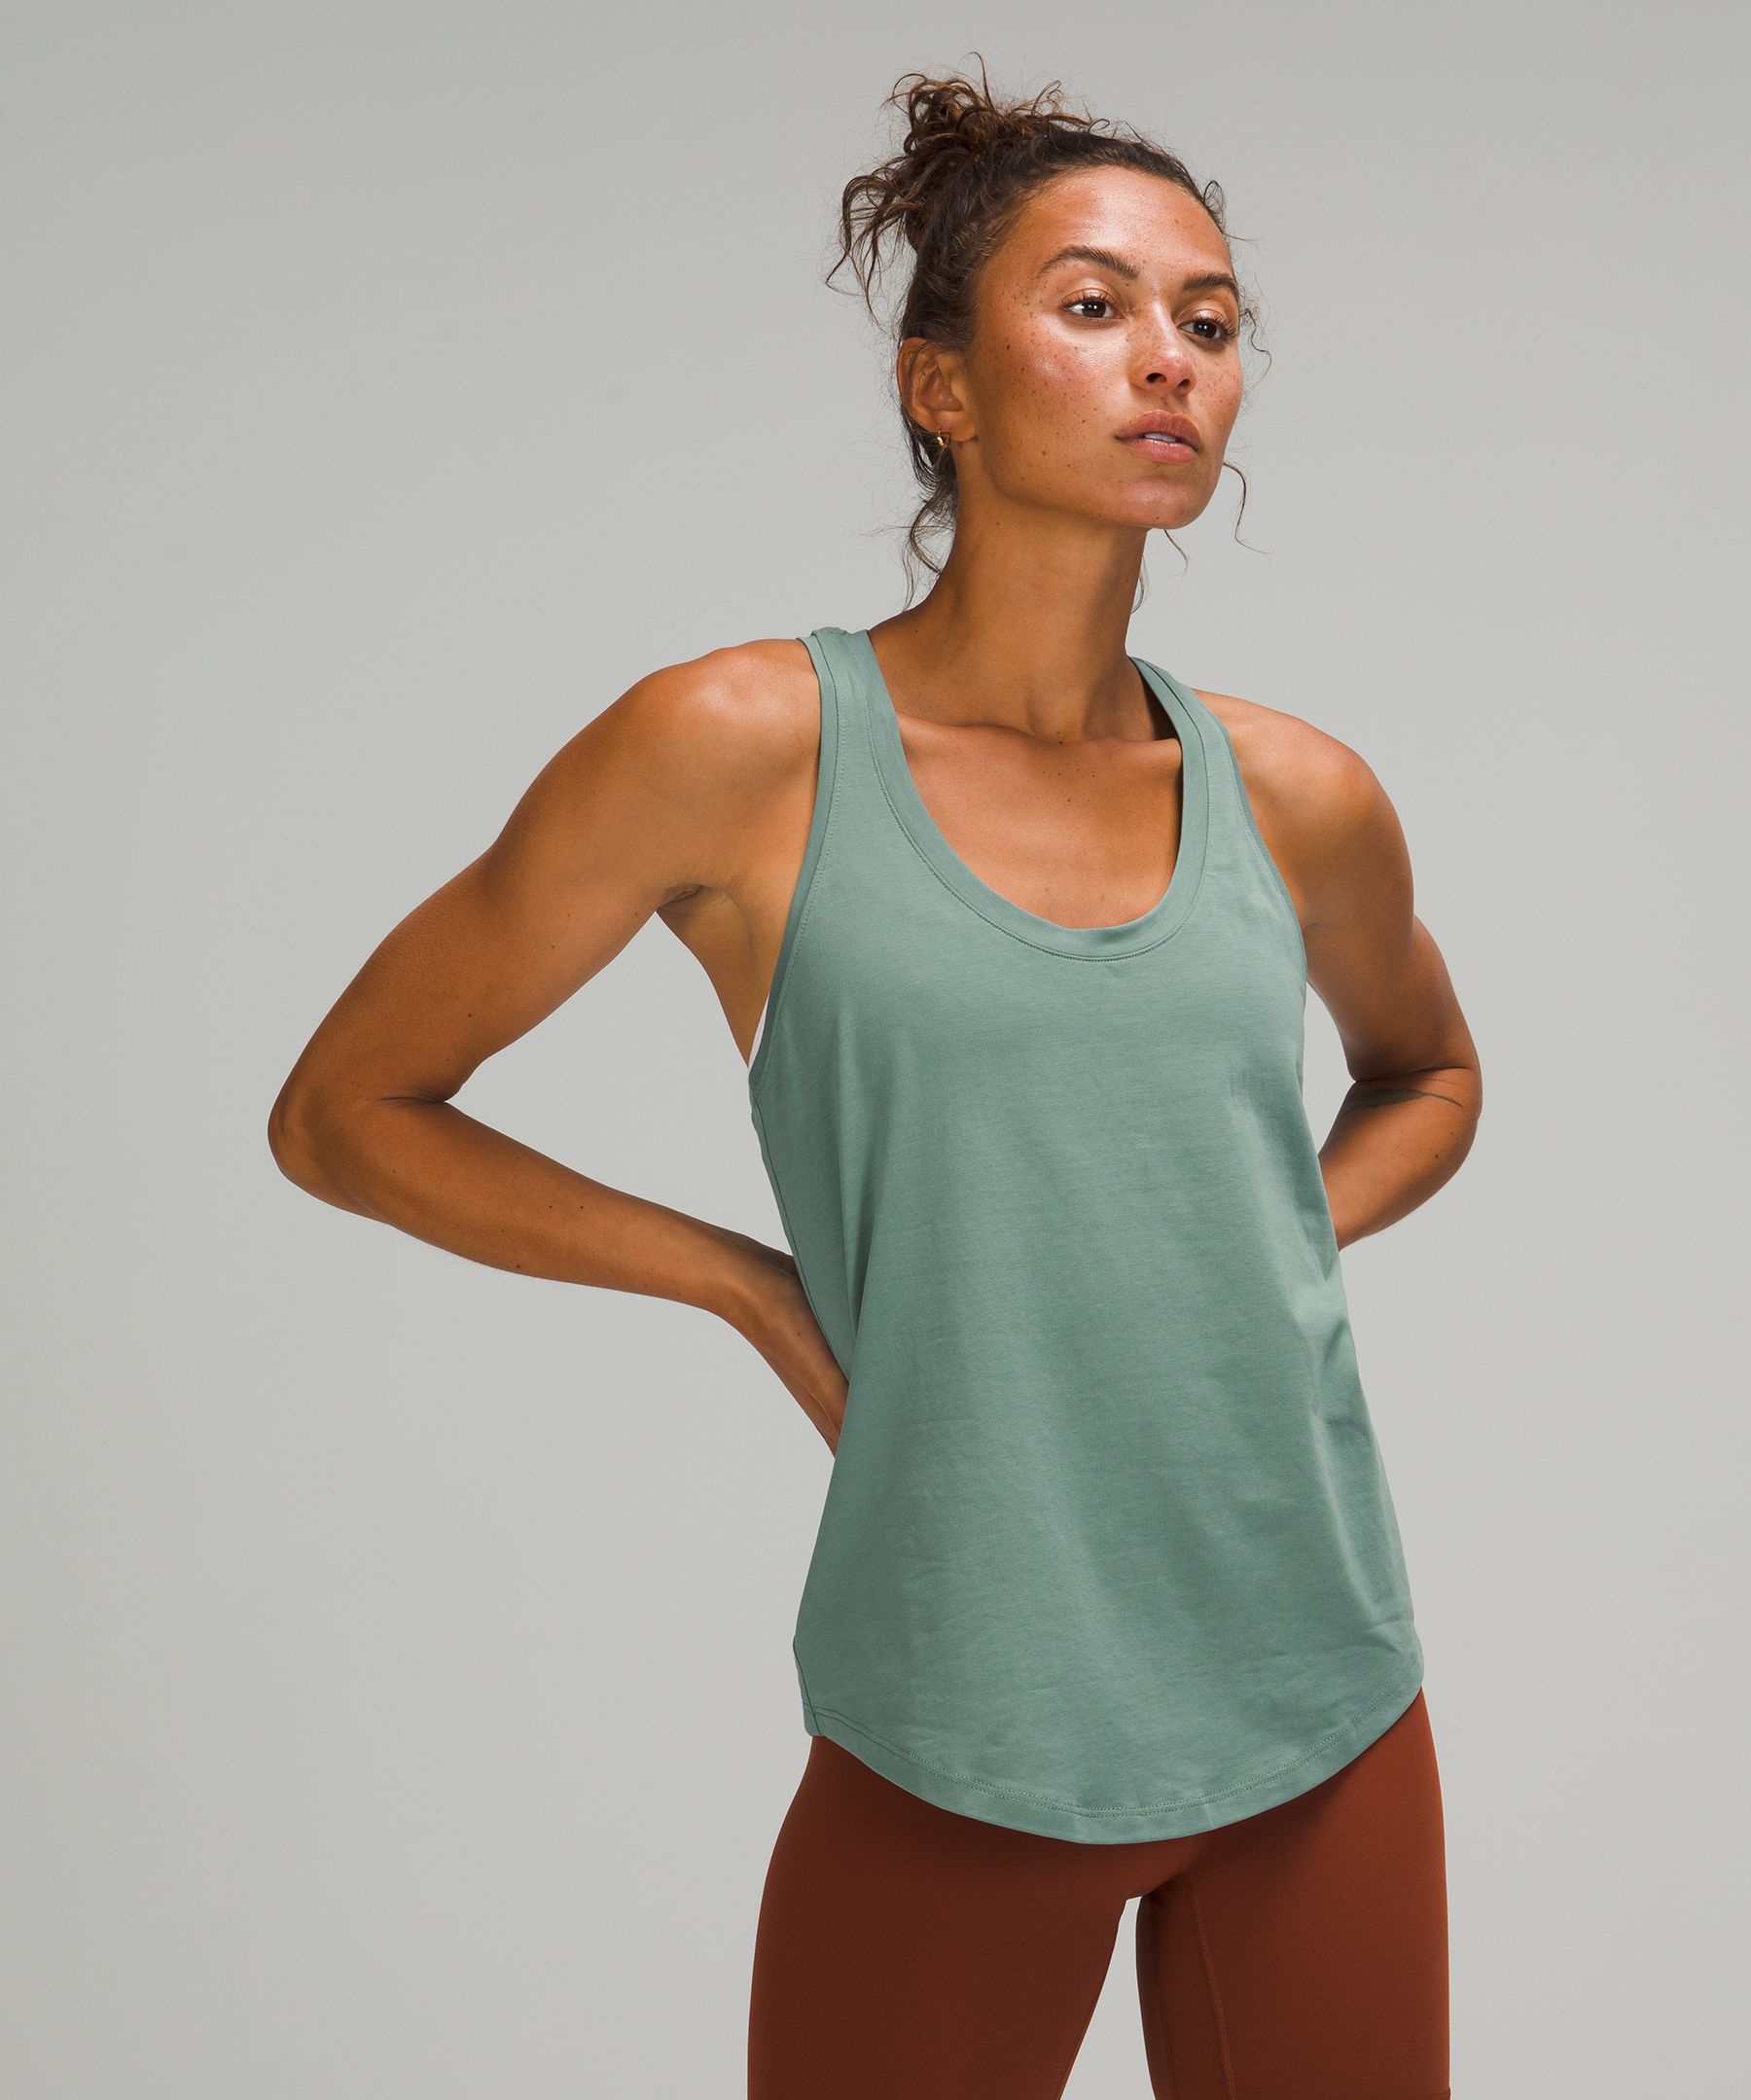 lululemon athletica Faux Leather Athletic Tank Tops for Women